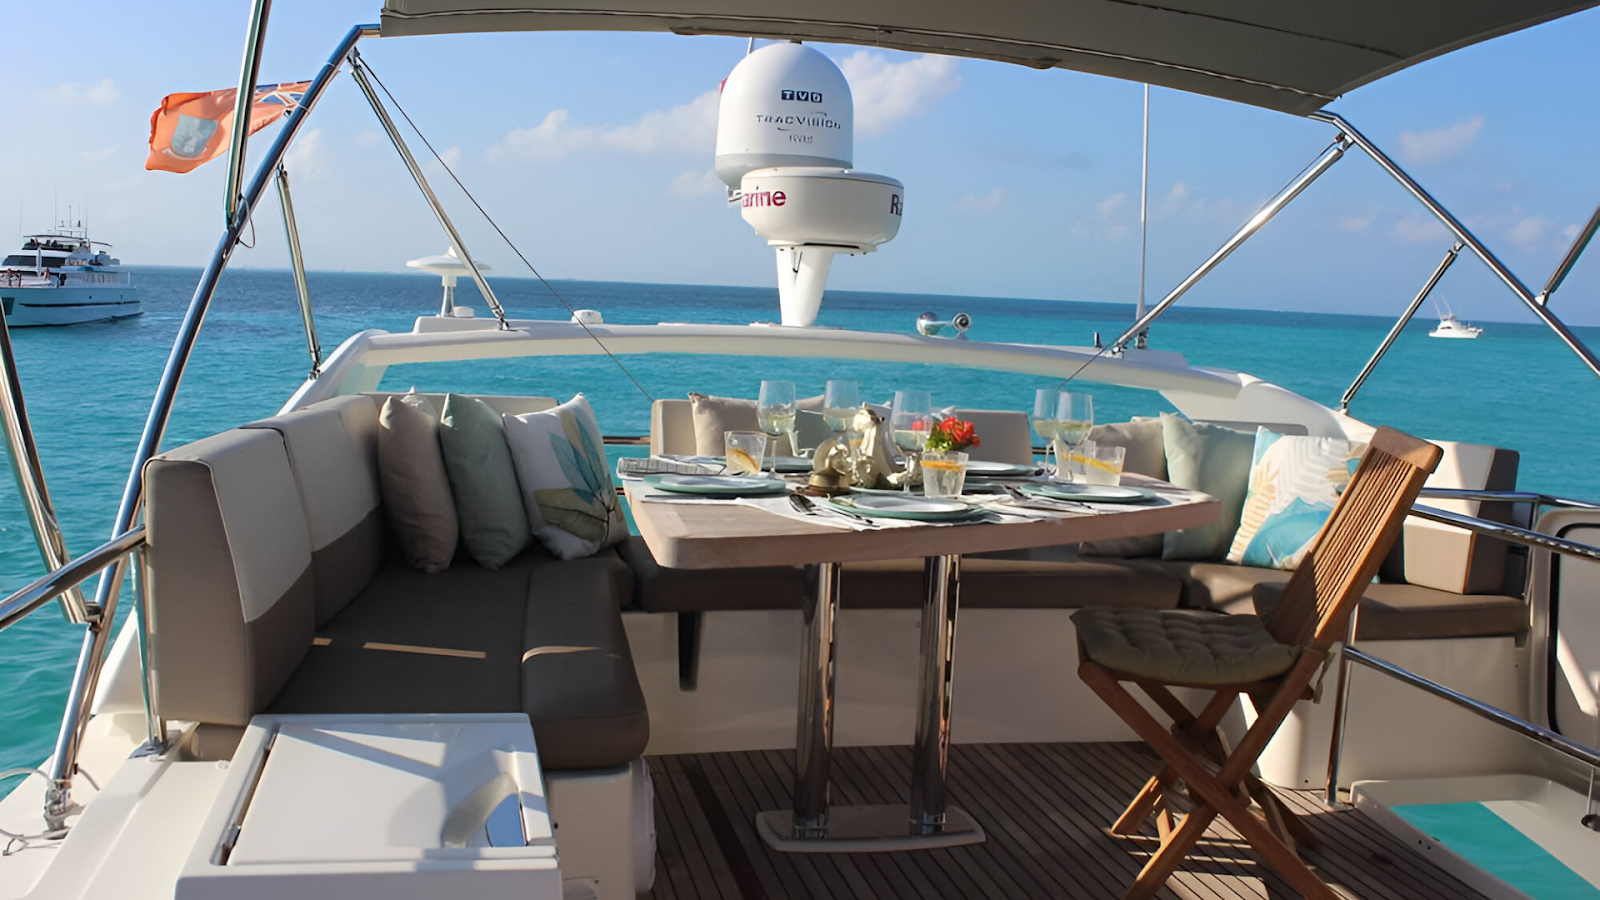 A dining table set up on the deck of a yacht